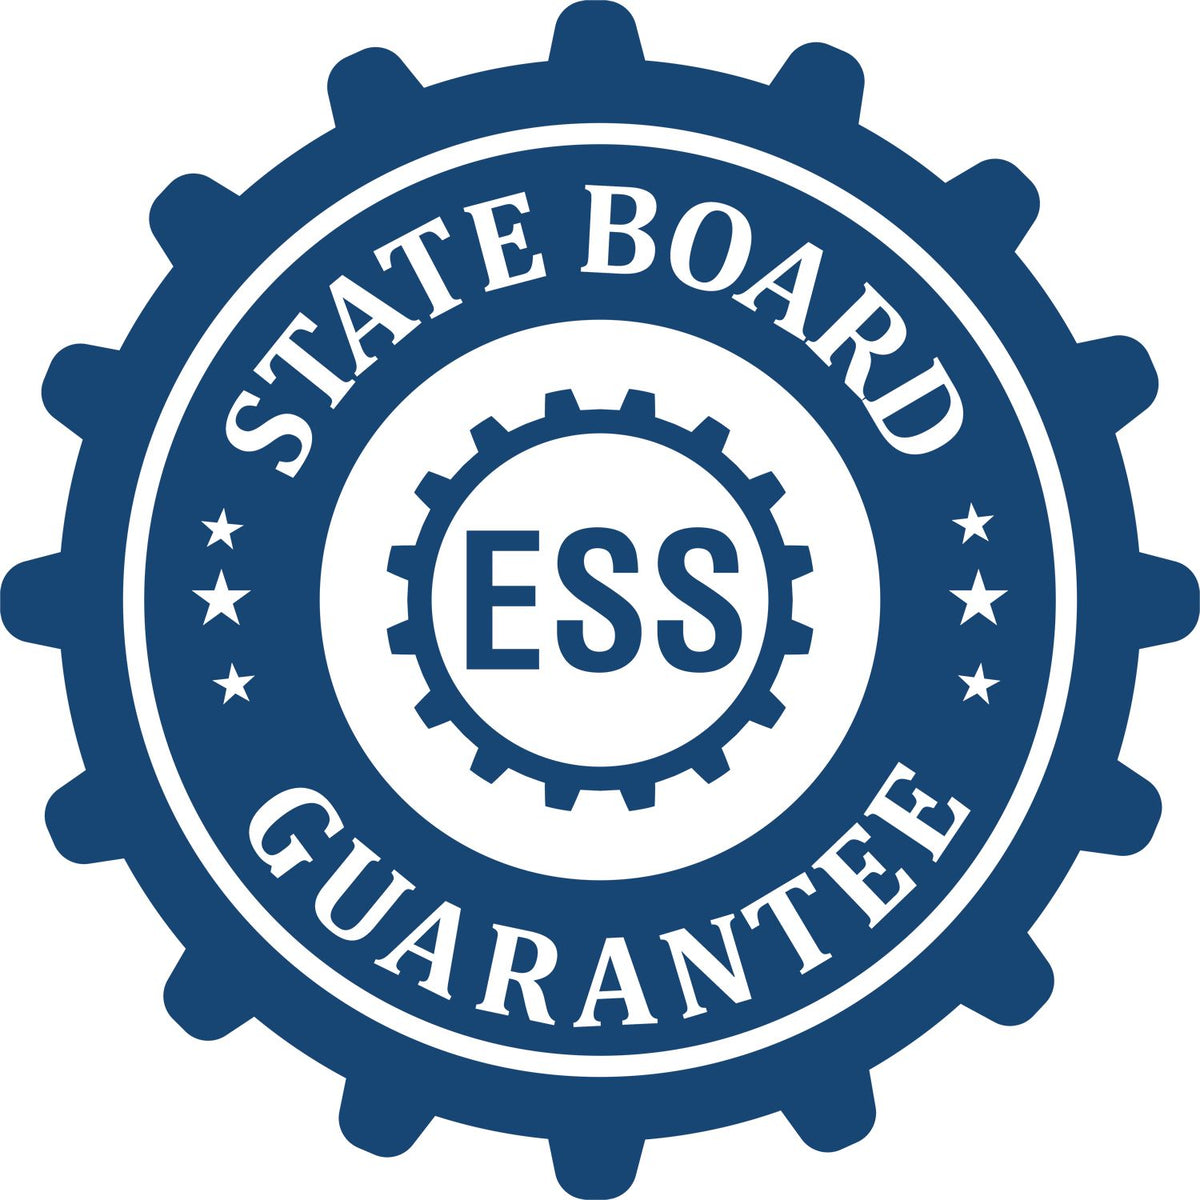 An emblem in a gear shape illustrating a state board guarantee for the Wooden Handle Georgia Rectangular Notary Public Stamp product.